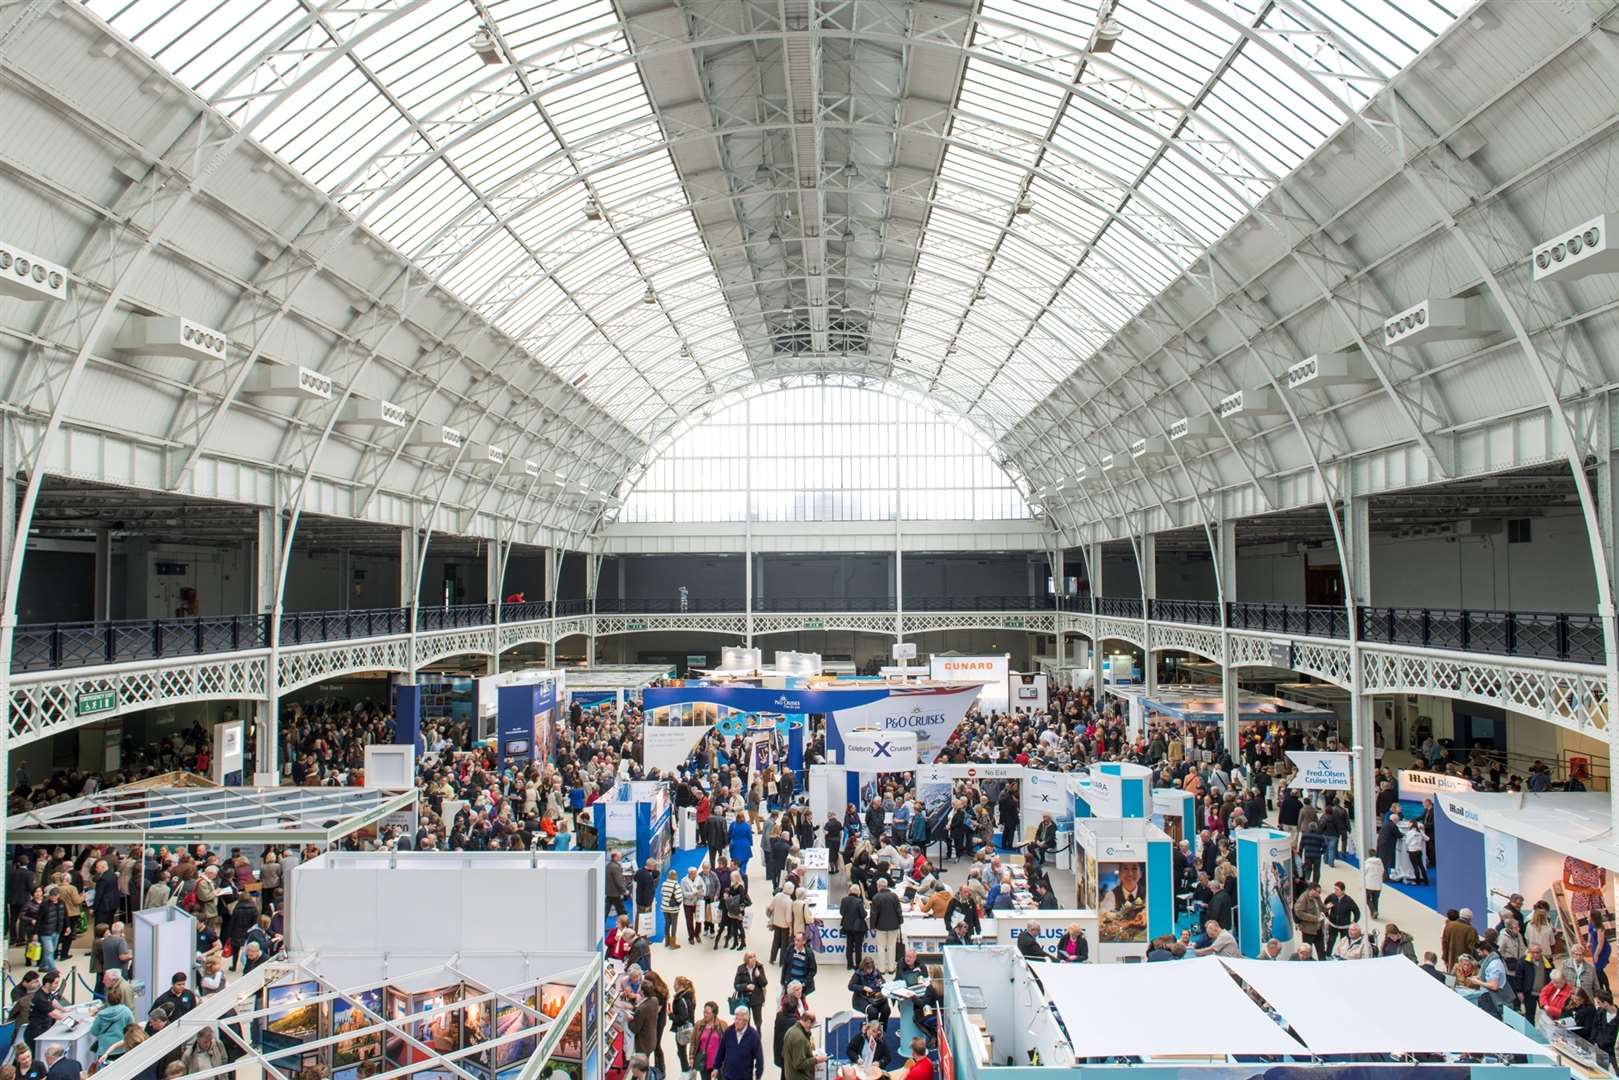 The Adventure Travel Show is held at Olympia in London